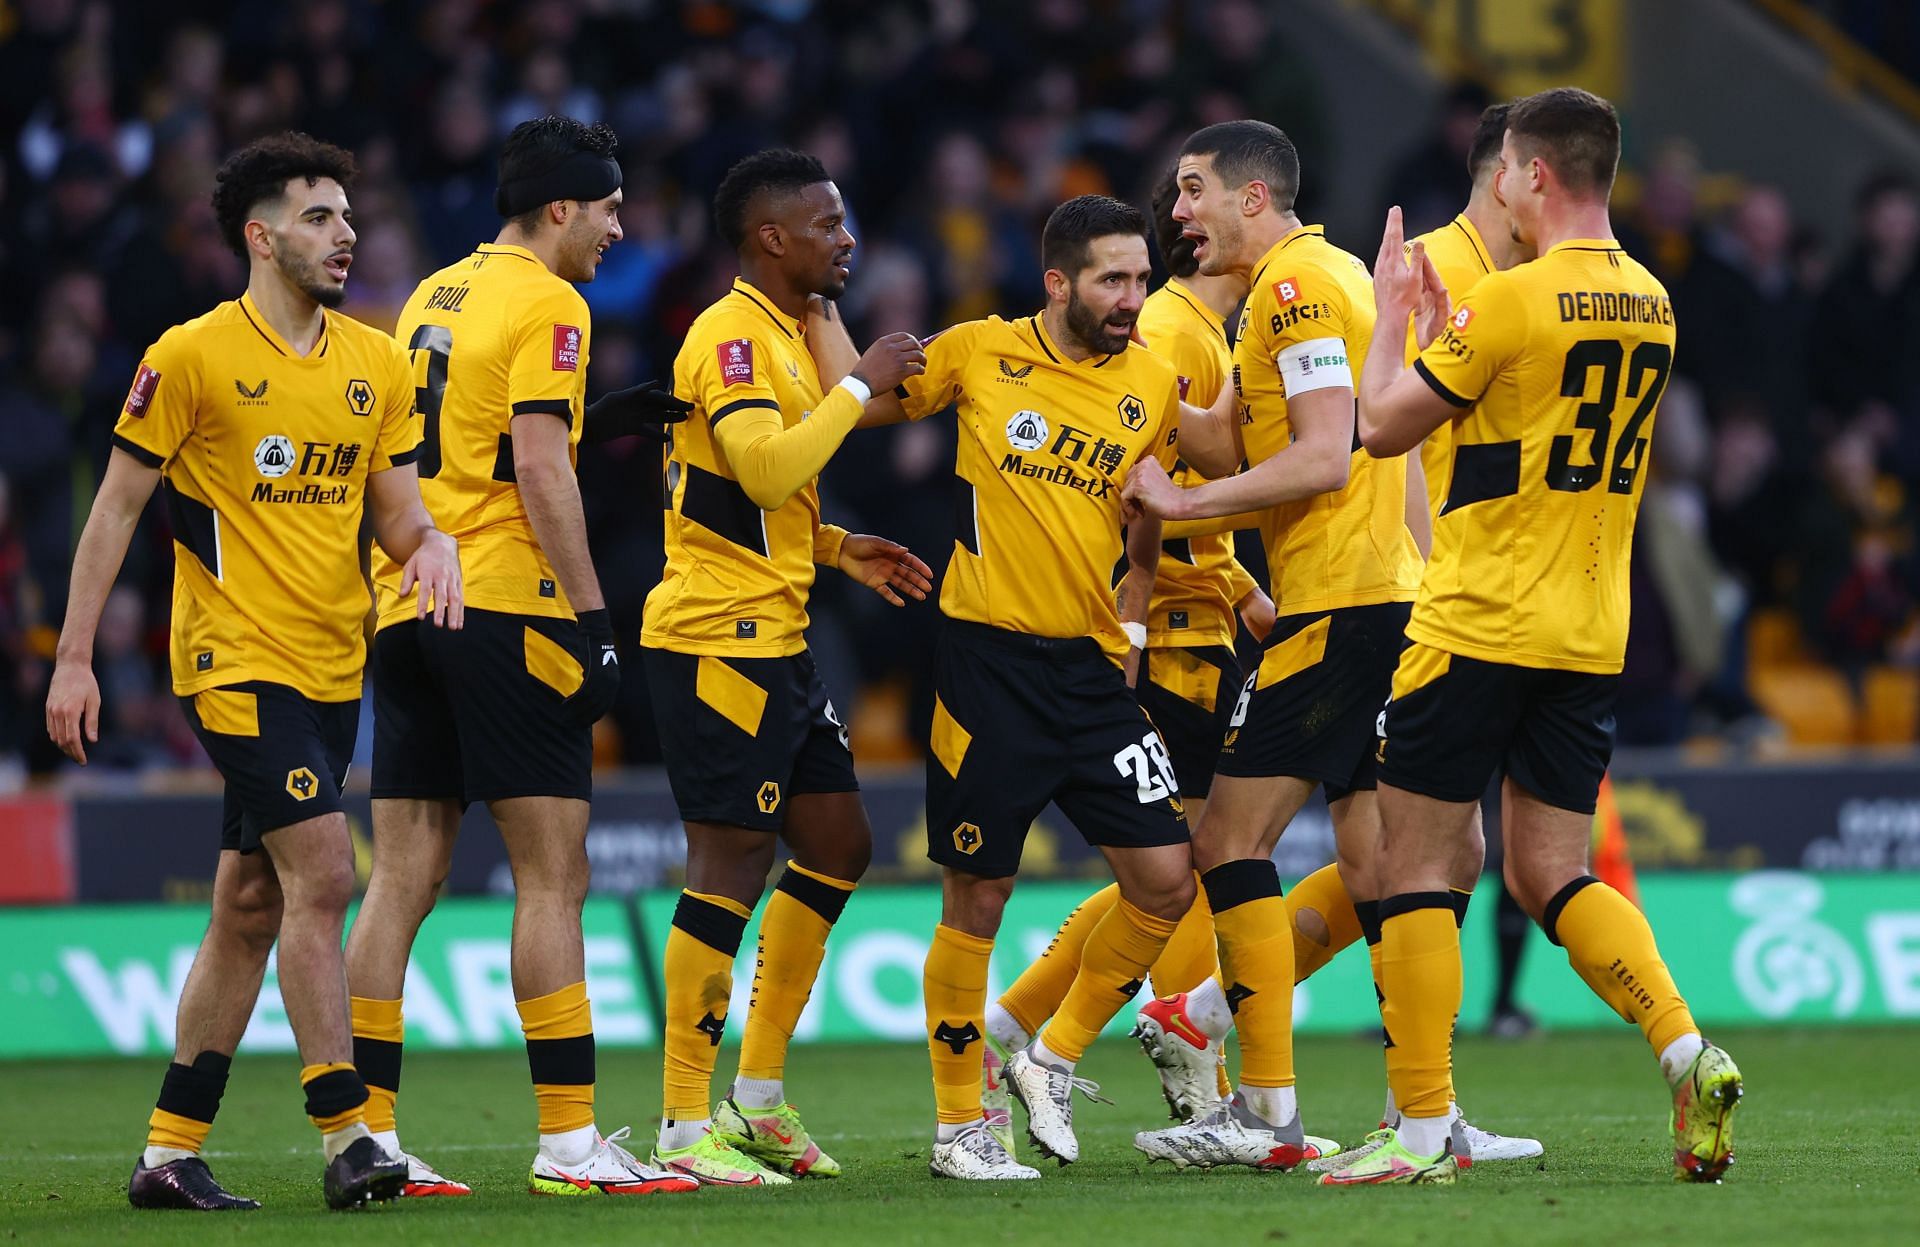 Wolverhampton Wanderers v Sheffield United: The Emirates FA Cup Third Round